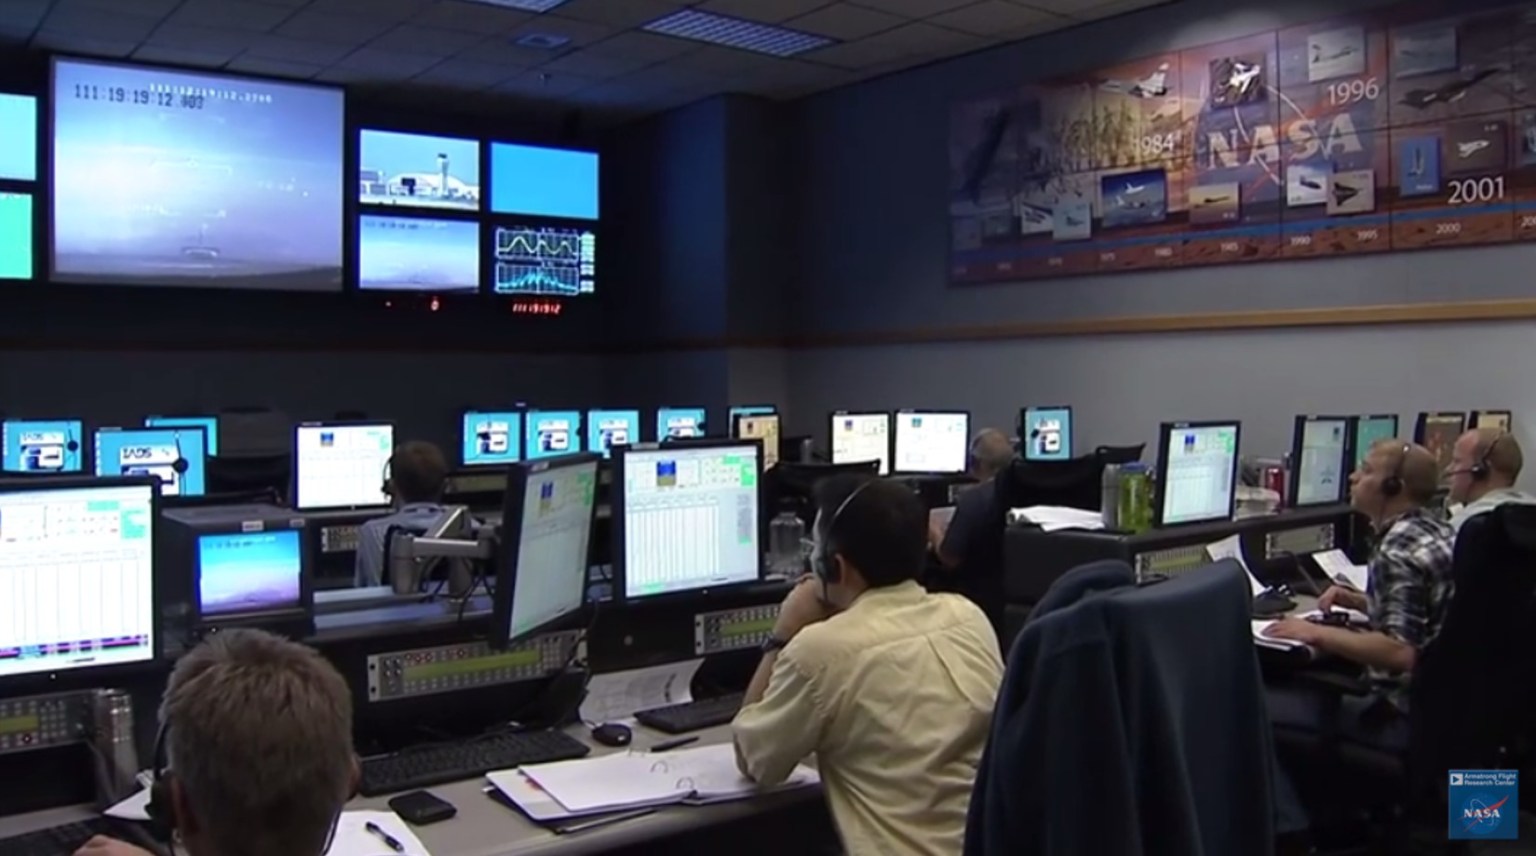 Mission control room with rows of computer stations. Six people sit at six of the many stations. A large monitor on the wall at the front of the room shows nine video feeds, four small video feeds on either side of one large video feed in the center.